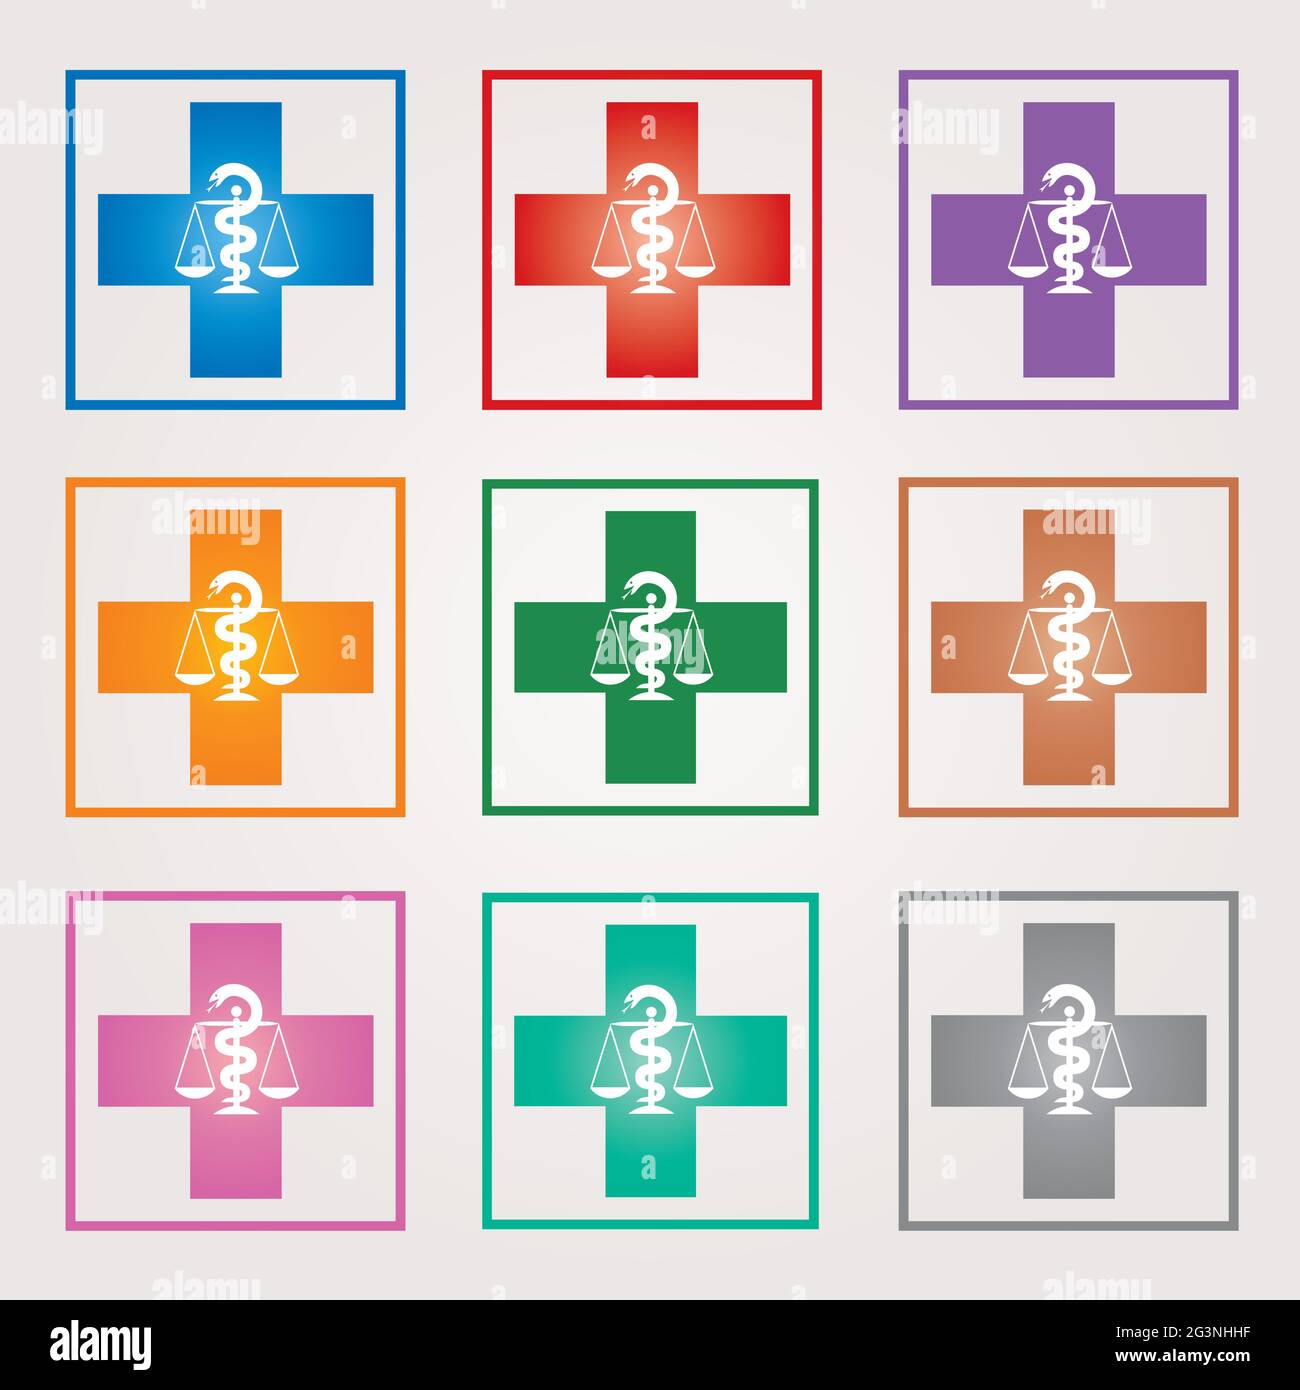 Set of Swiss Pharmacy Icons with Caduceus Symbol in Mixed Colors - Swiss Cross Symbols in Squares Stock Vector